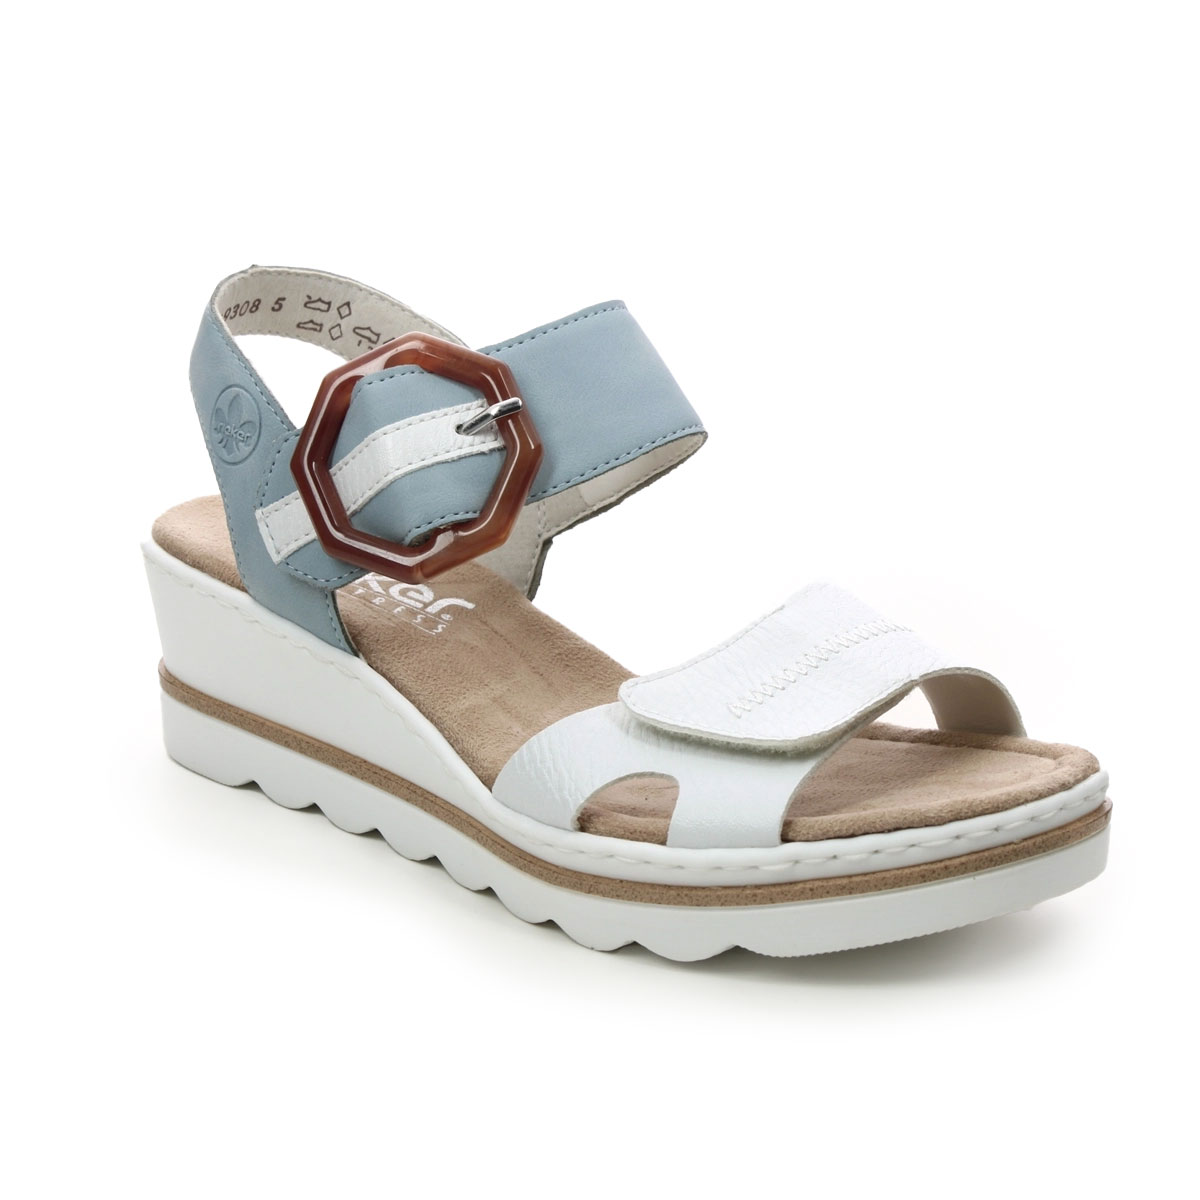 Rieker 67476-10 White Light Blue Womens Wedge Sandals in a Plain Man-made in Size 37